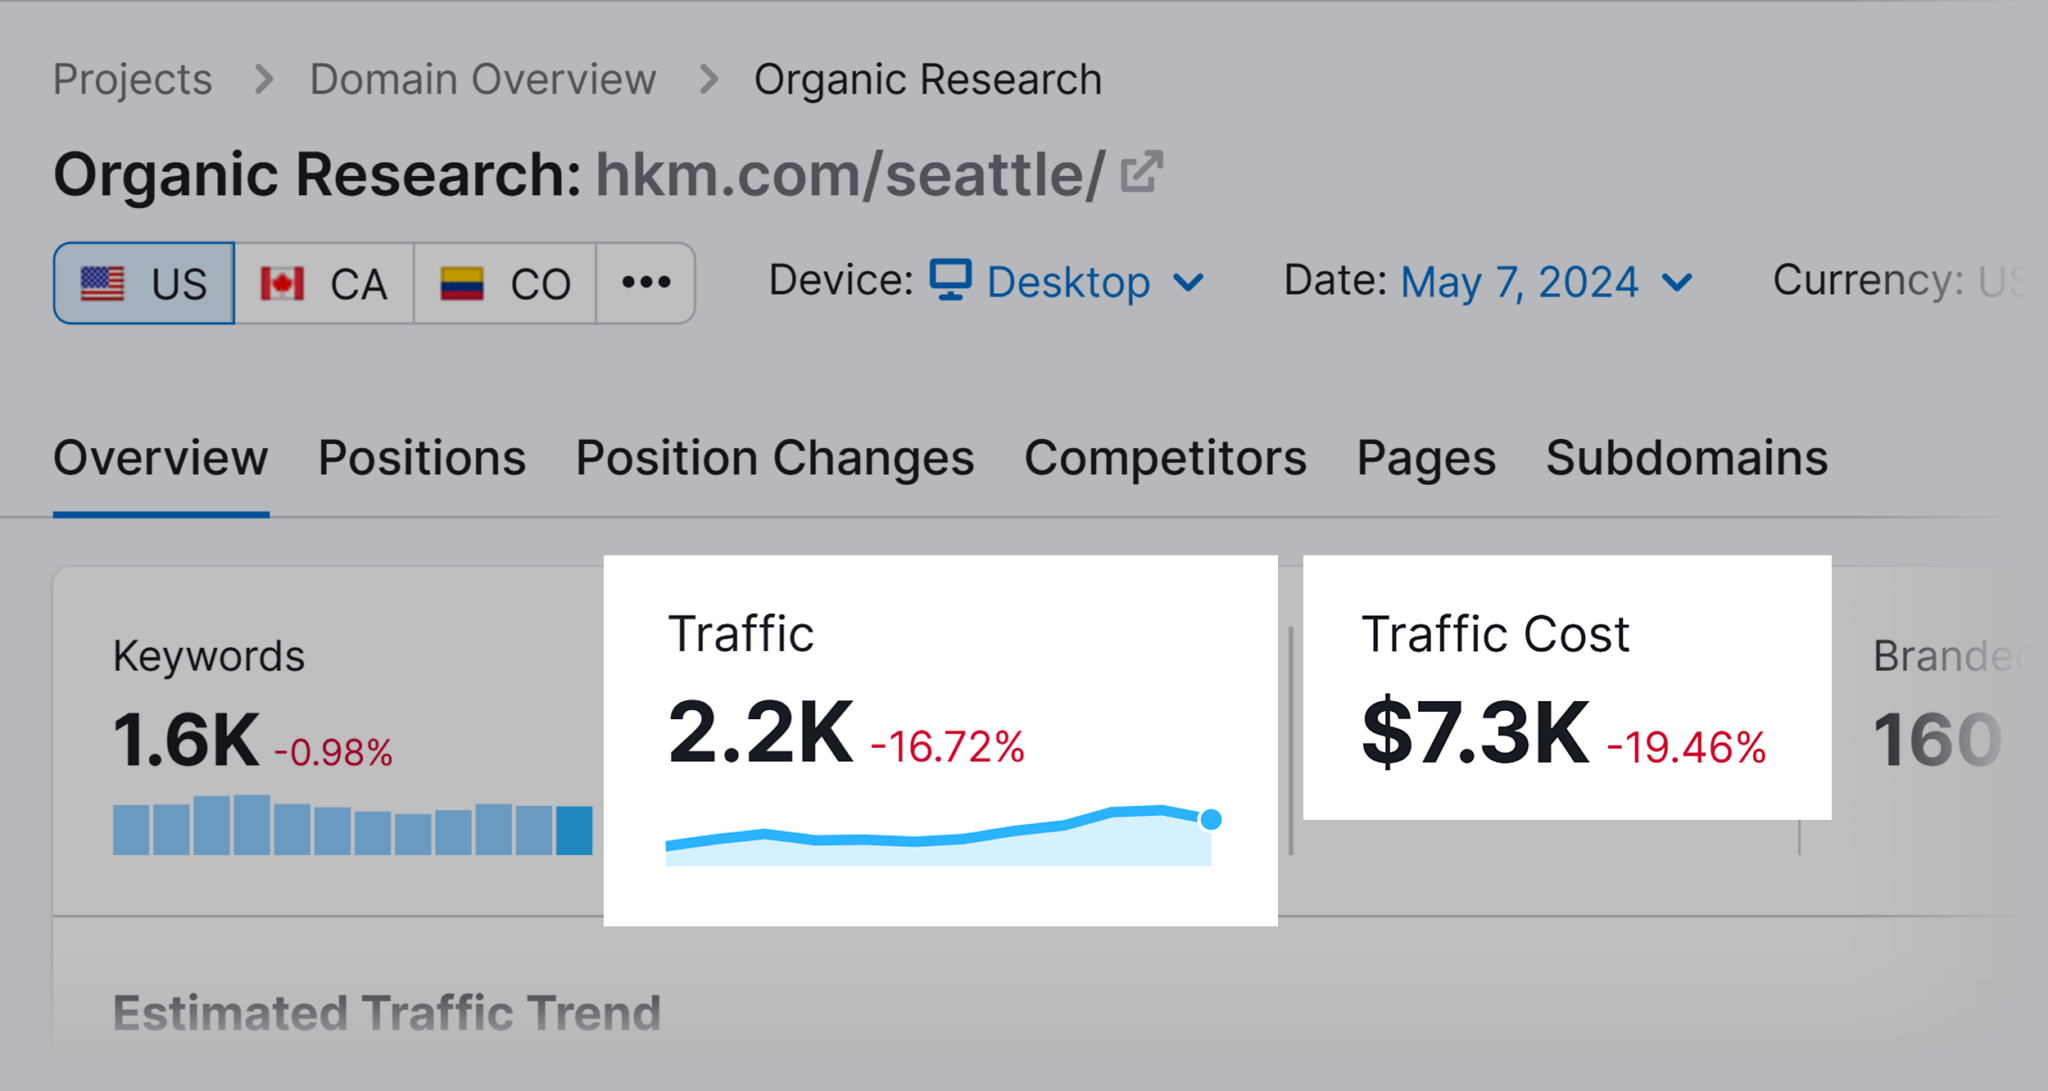 organic-overview-hkm-seattle Law Firm SEO: A 5-Step Guide to Getting More Leads and Clients